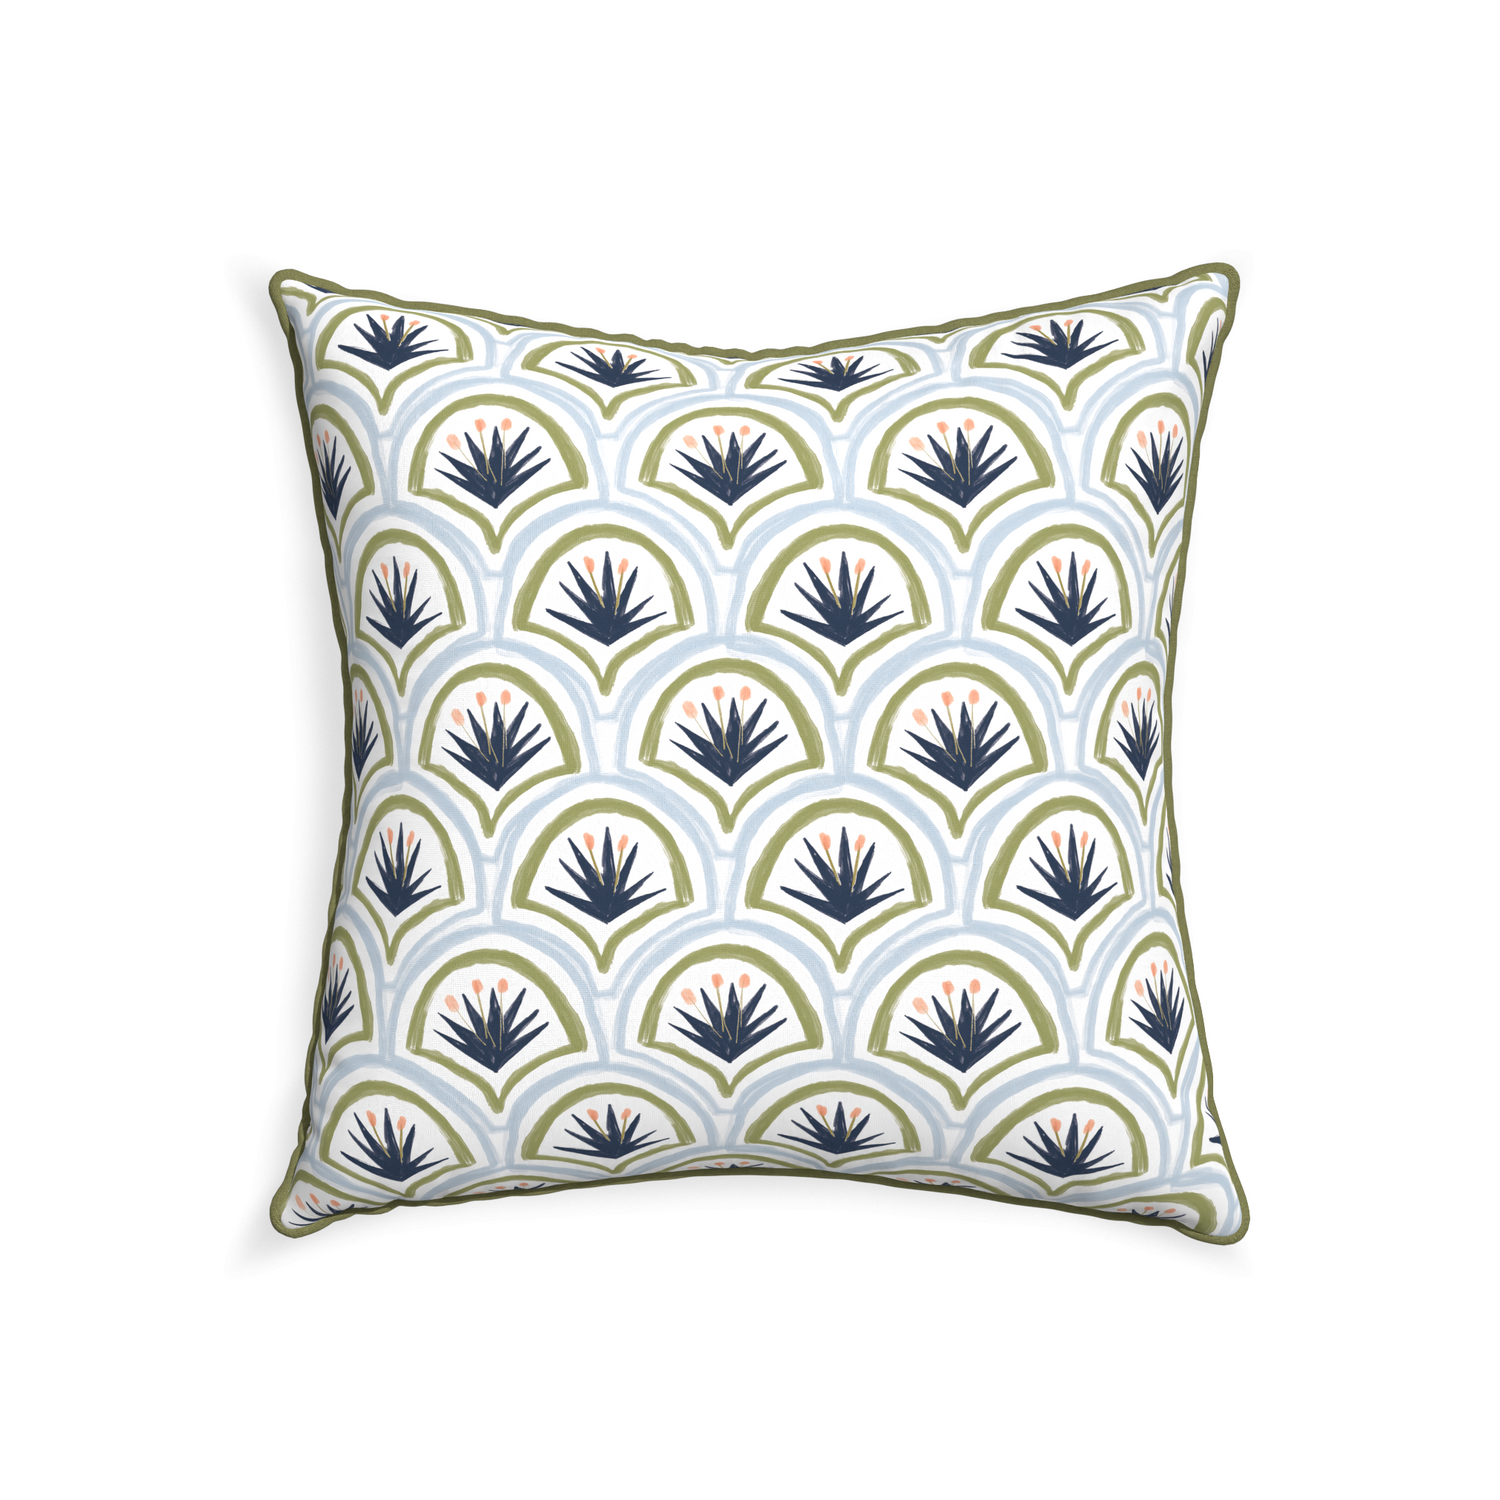 22-square thatcher midnight custom art deco palm patternpillow with moss piping on white background